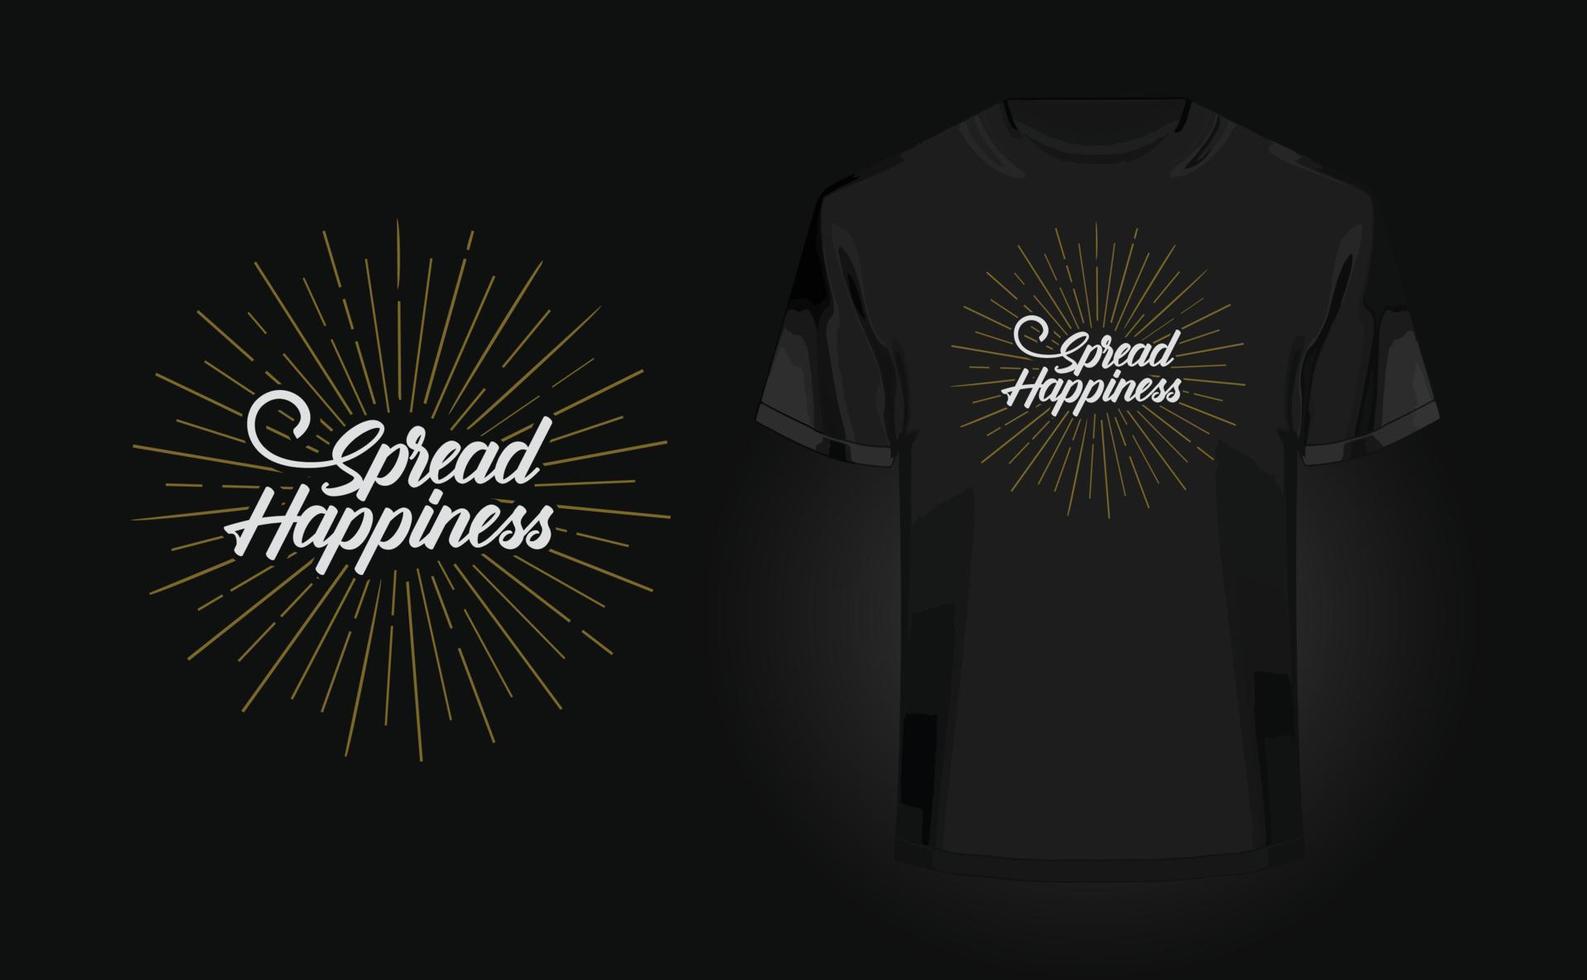 Spread Happiness - t-shirt design quotes for t-shirt printing, clothing ...